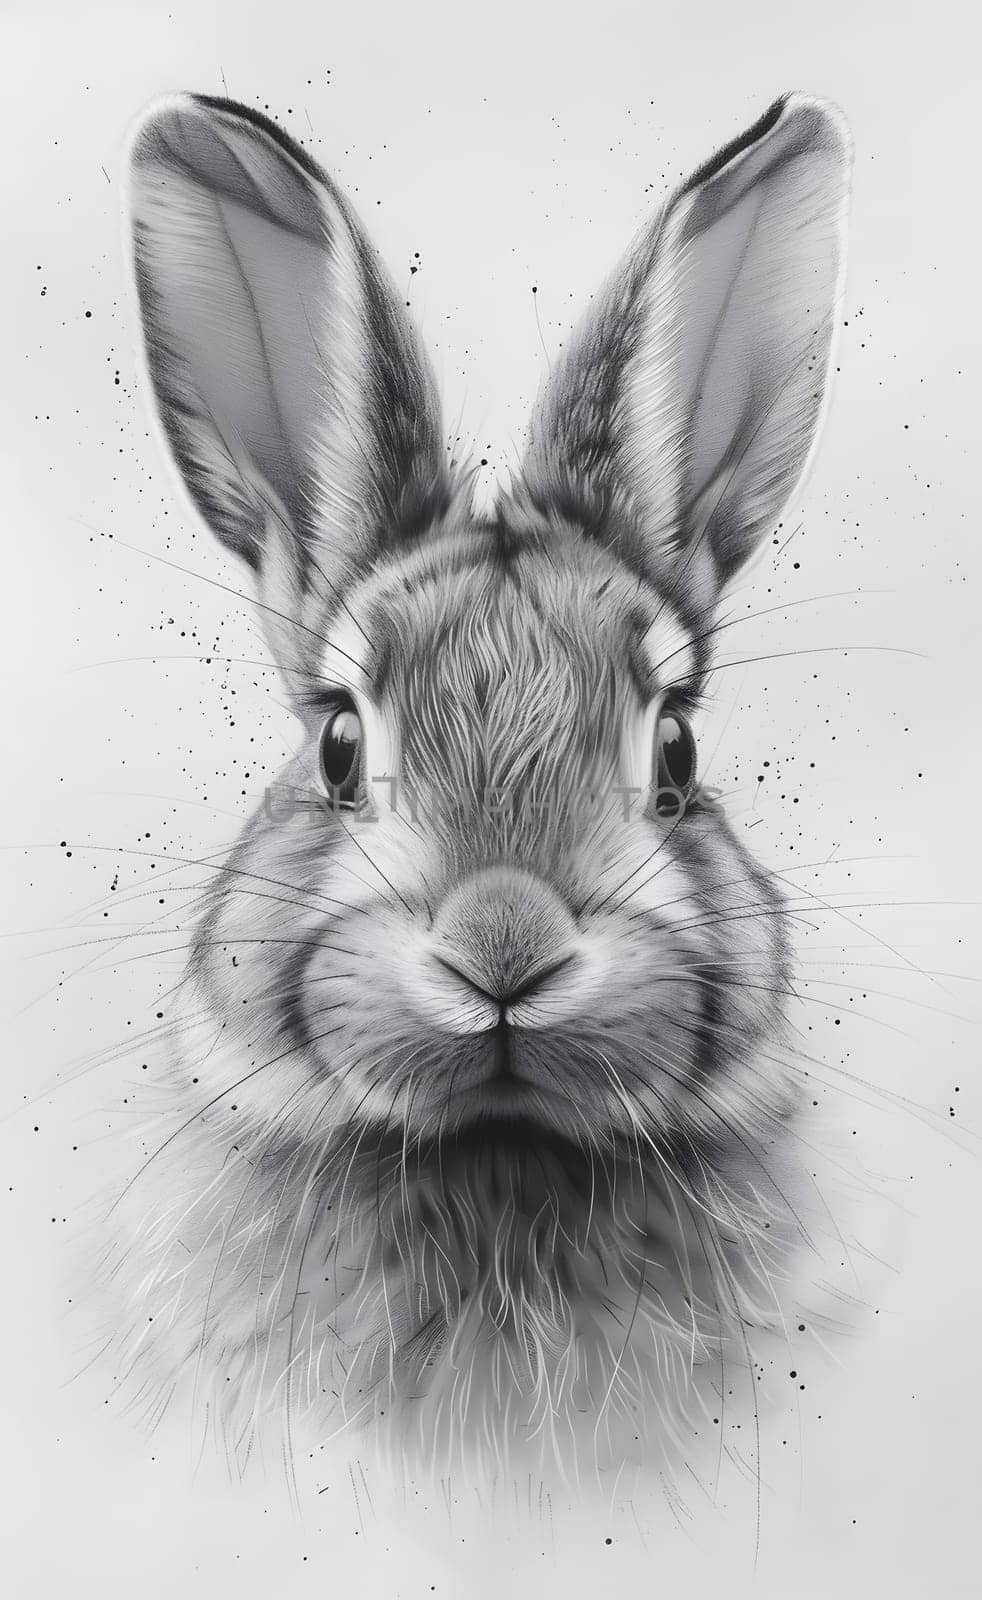 a black and white drawing of a rabbit looking at the camera by Nadtochiy